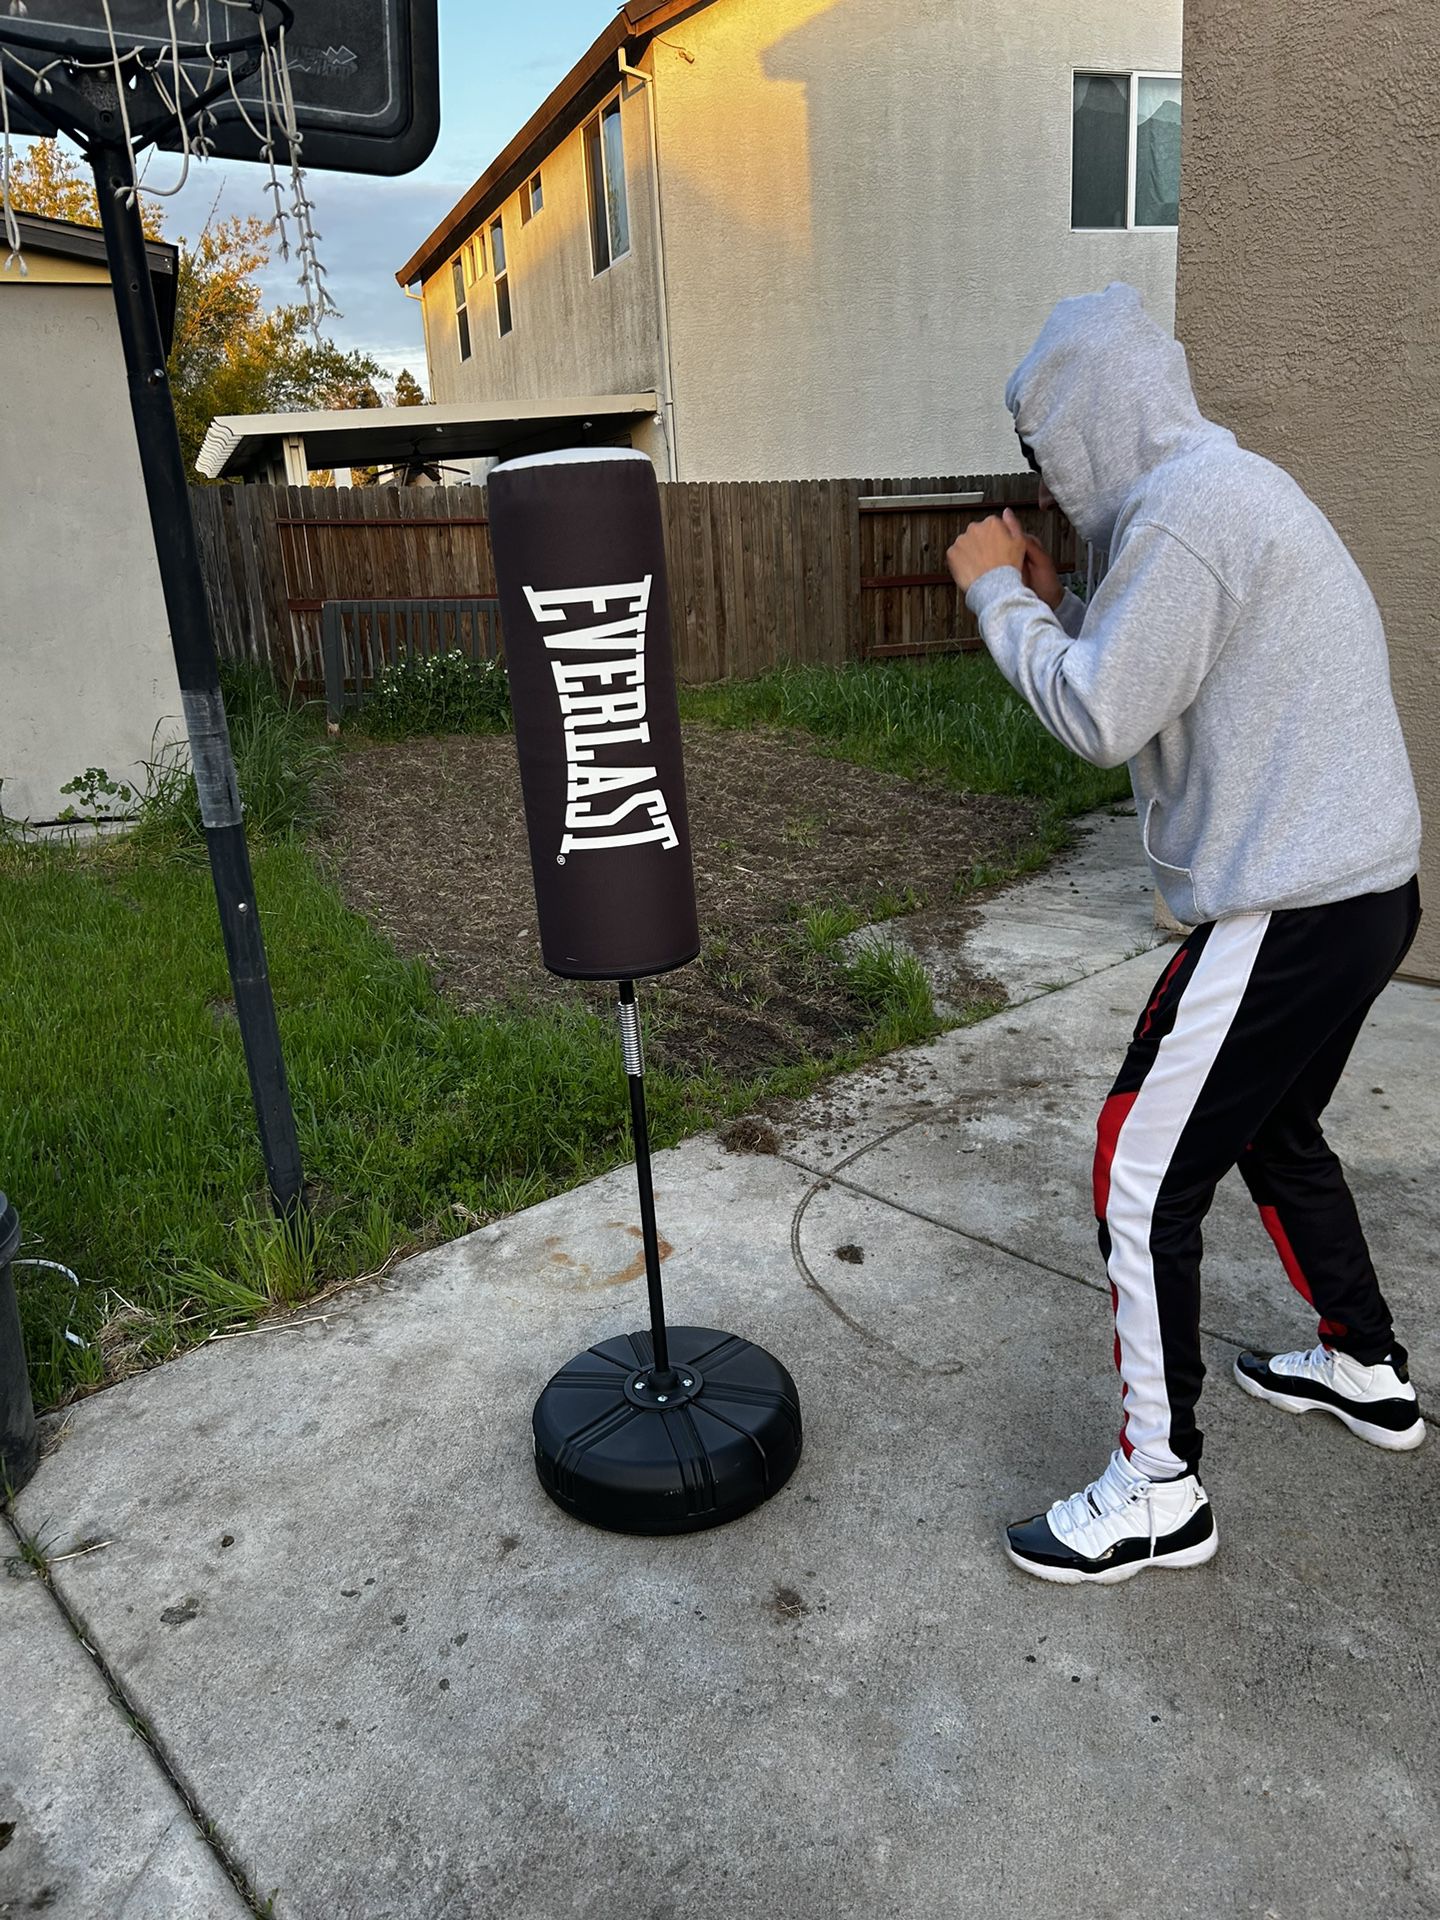 Everlast Punching Bag  Bottom Filled With Water/sand